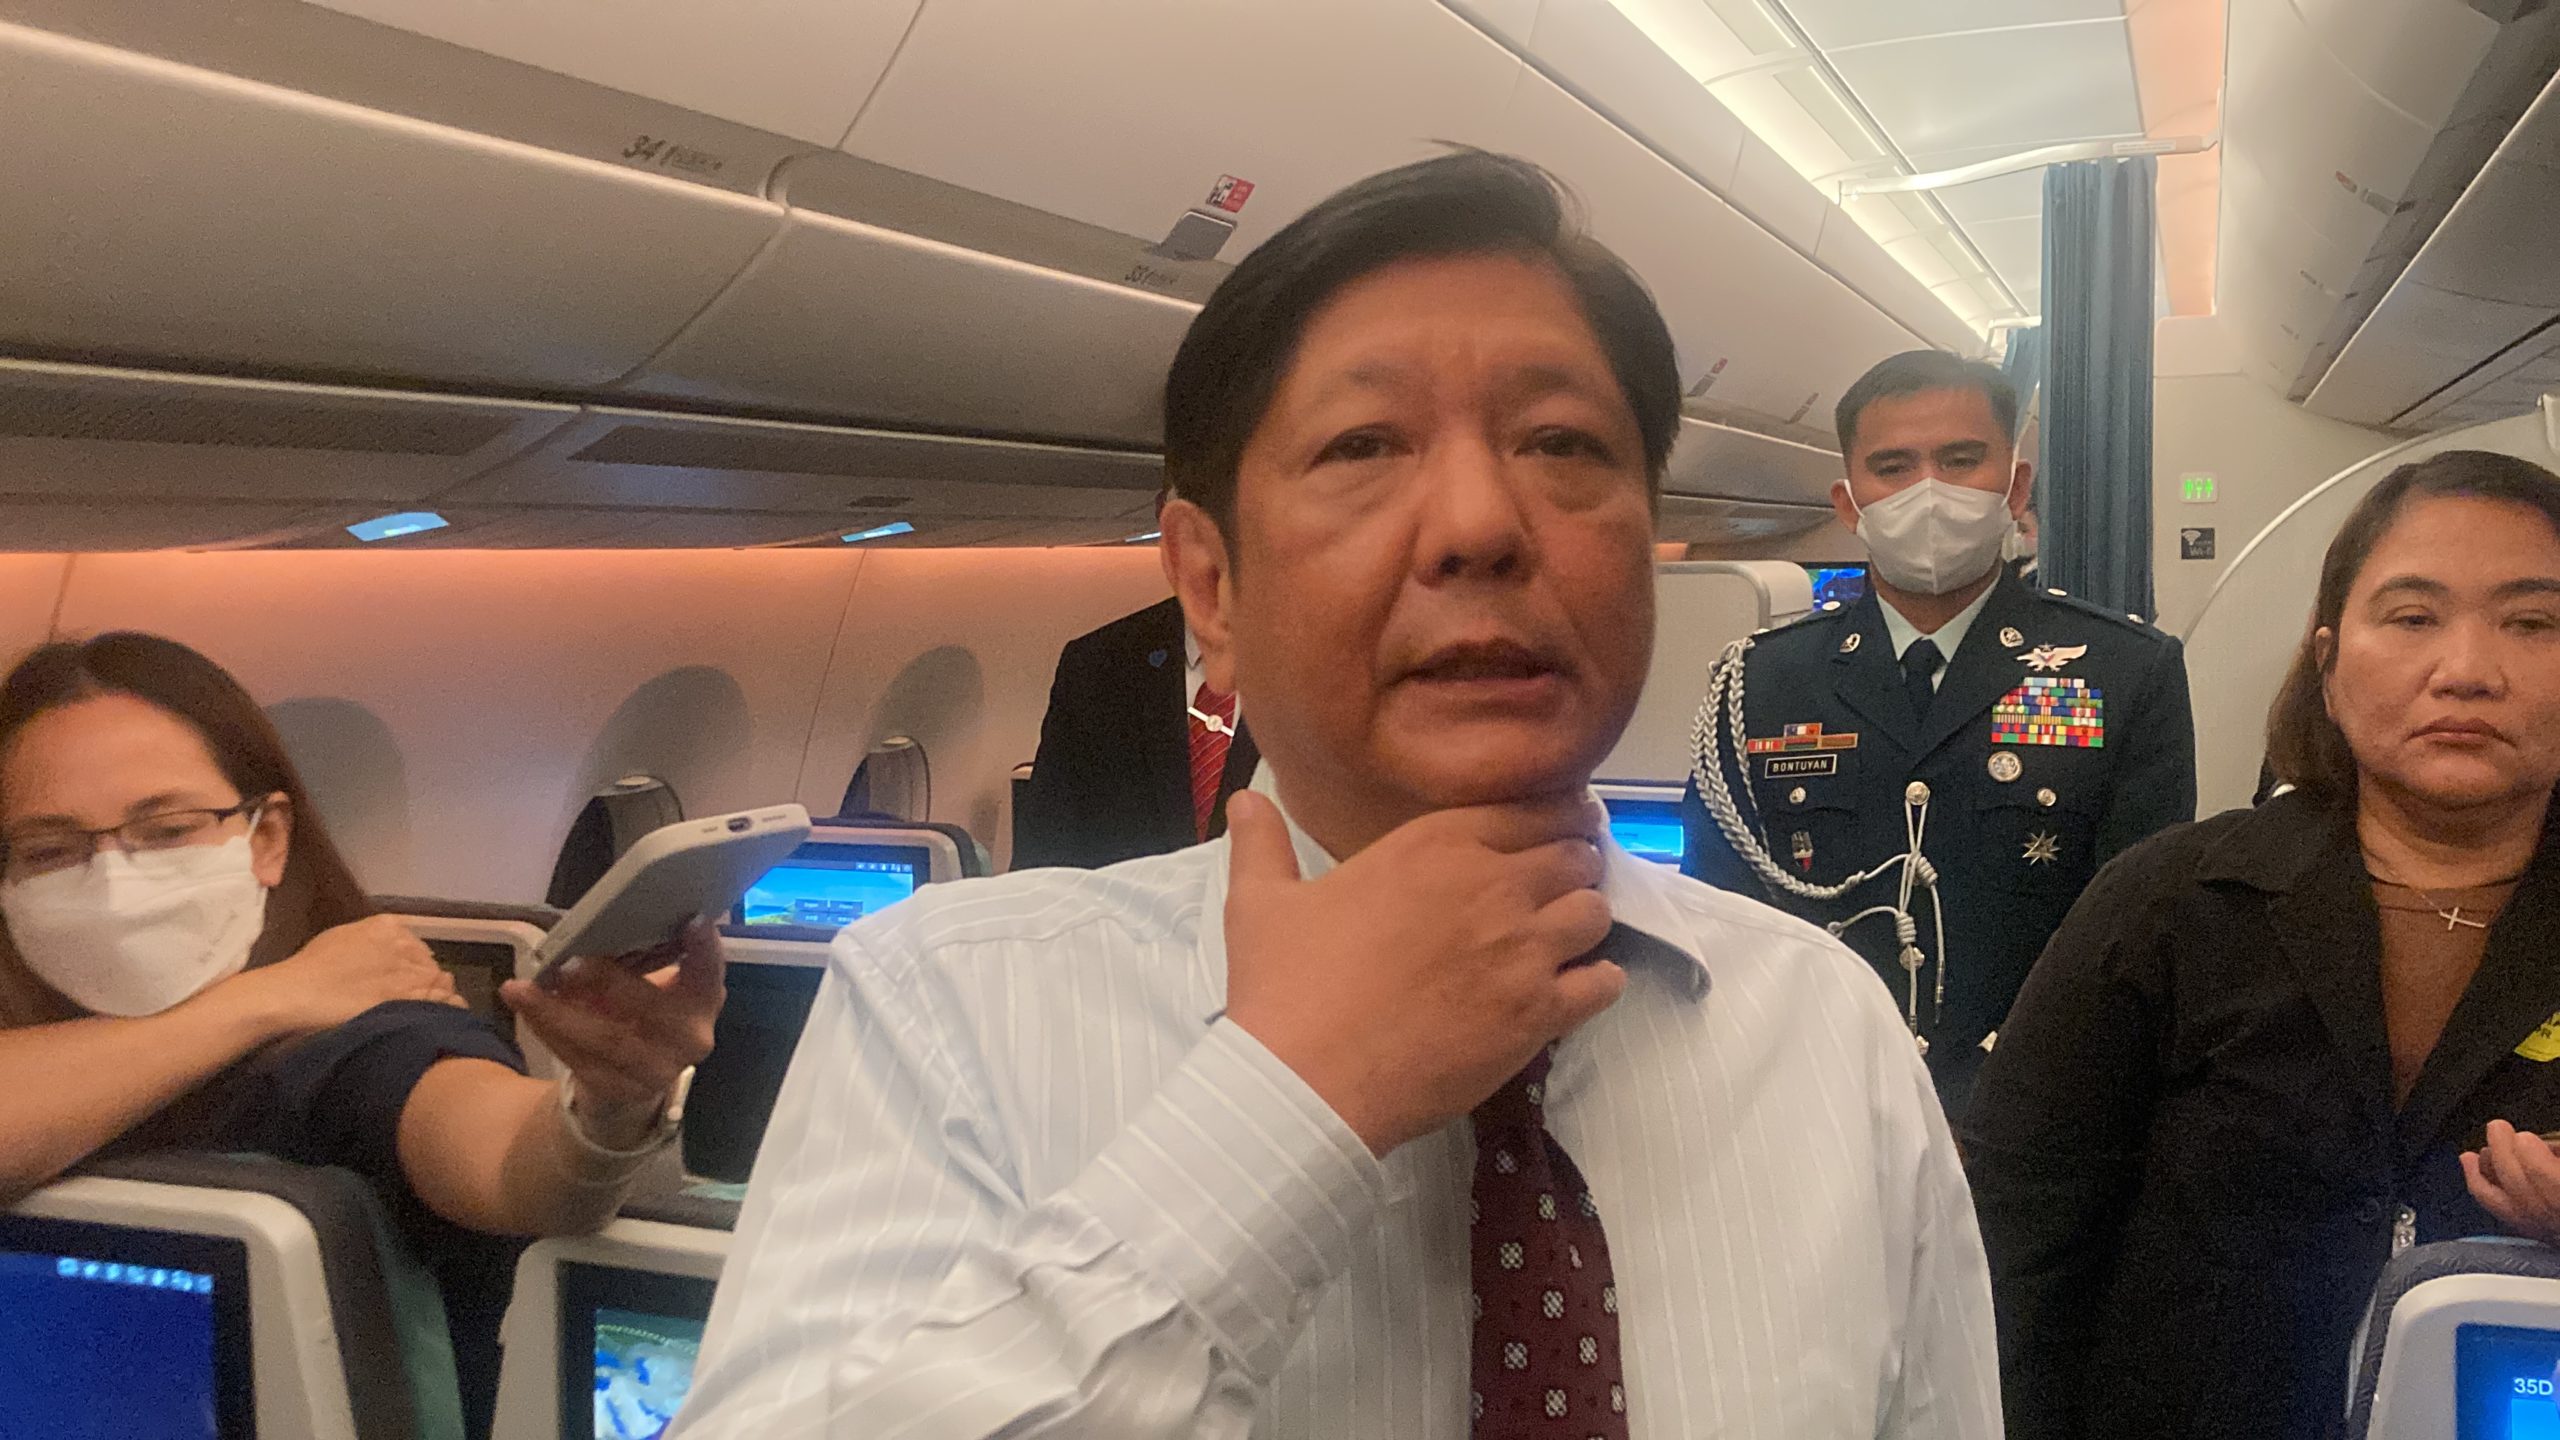 President Ferdinand Marcos Jr. speaks to reporters onboard PR001 enroute to Belgium to attend the Association of Southeast Asian Nations-European Union (Asean-EU) Commemorative Summit in Brussels. Photo by Nestor Corrales standards seafarer